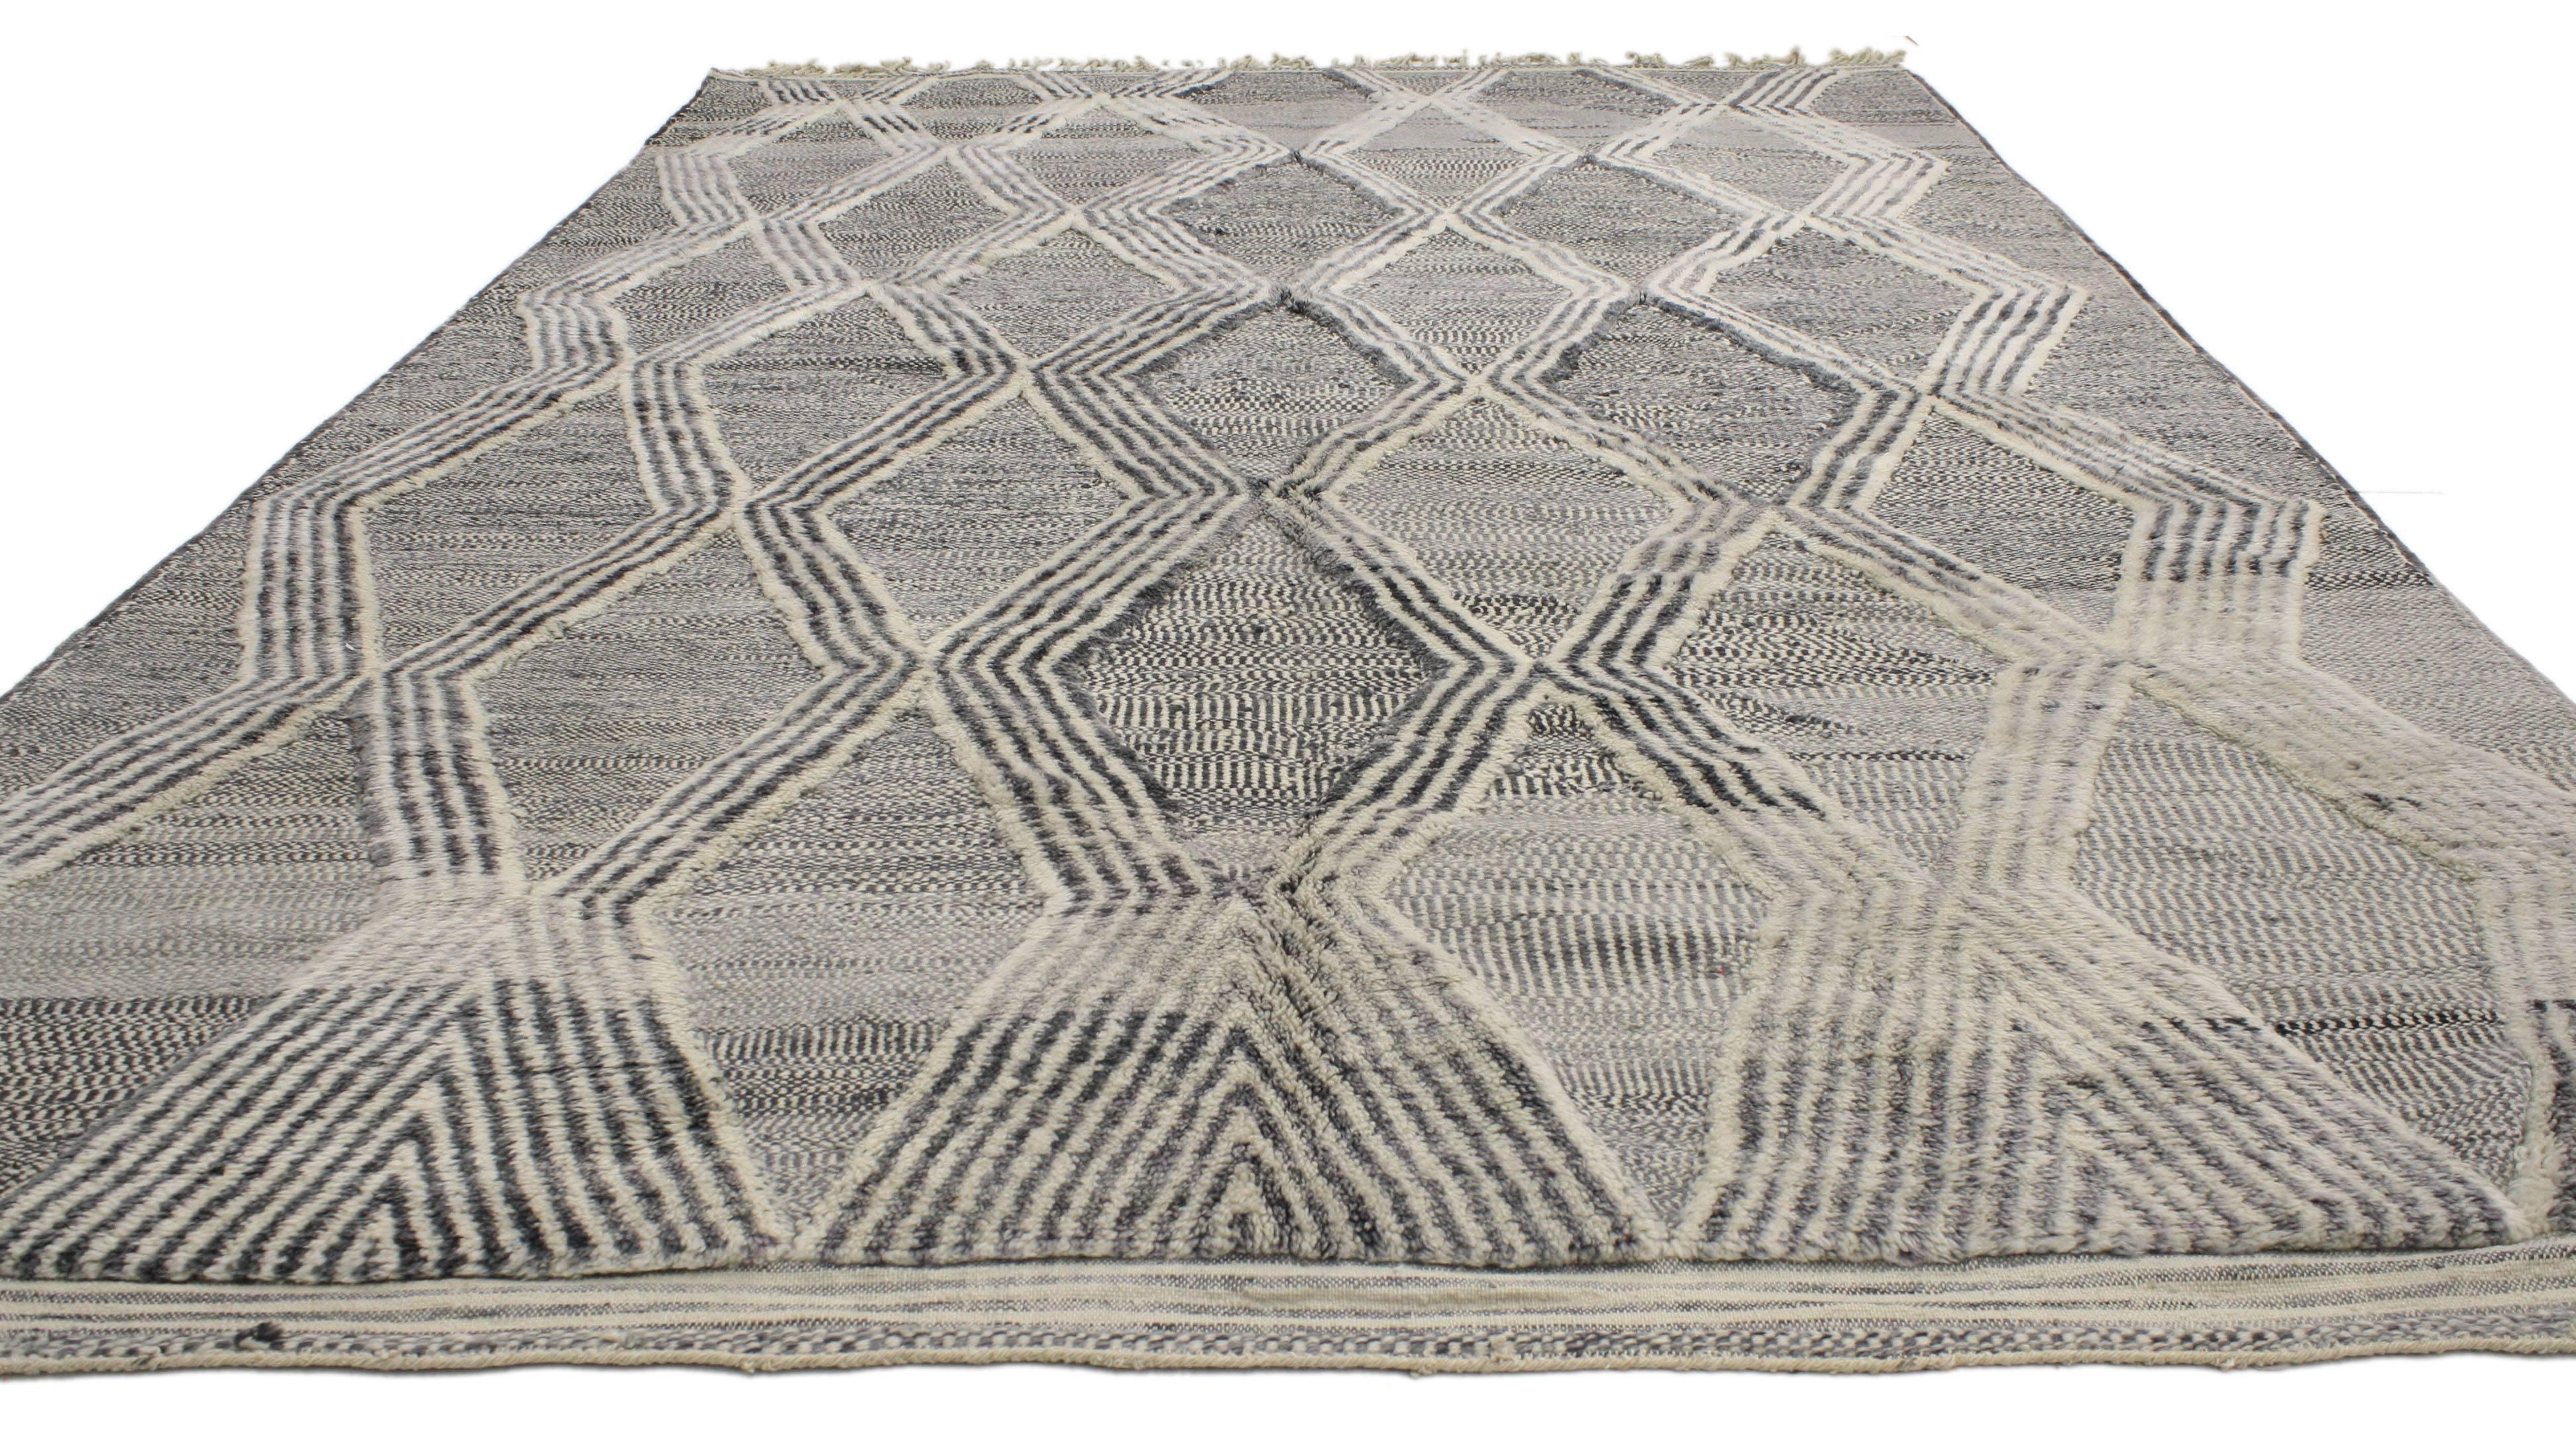 20520, contemporary modern Moroccan rug with high and low pile. Spike the energy in your space with the geometric pattern found in this contemporary Modern Moroccan rug. It is a two layer rug featuring a high and low pile with repeating diamond